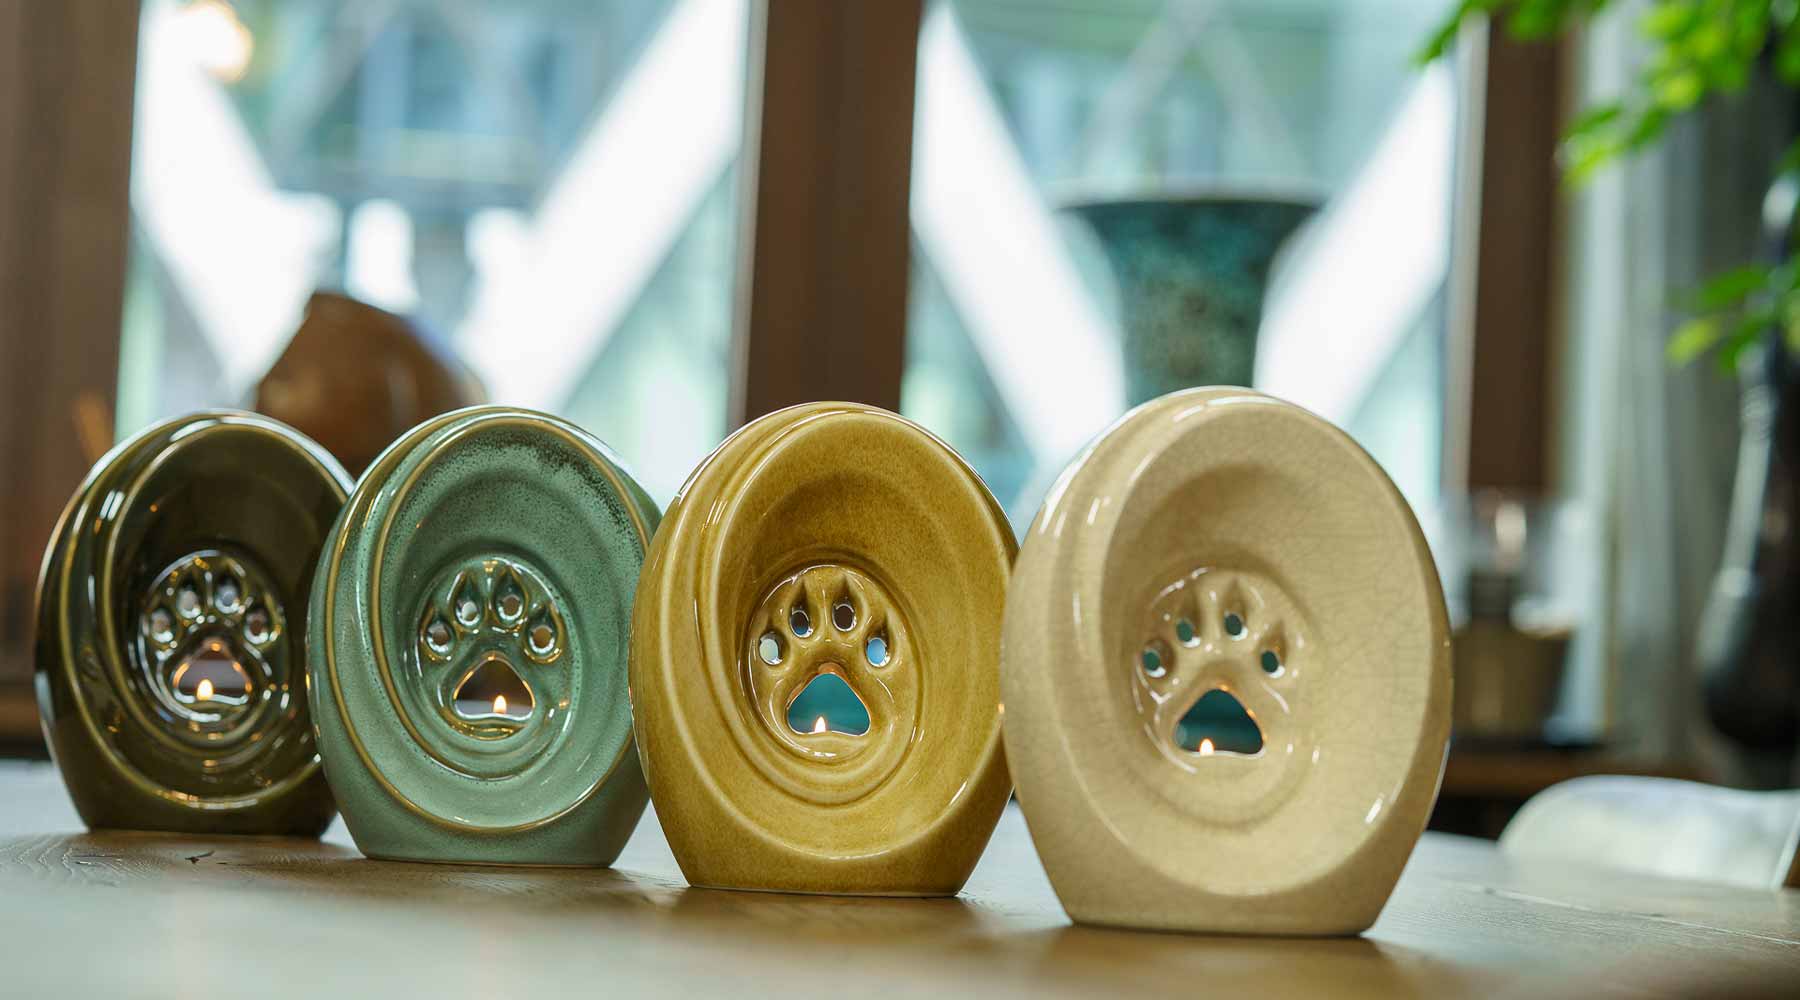 5 fantastic hand crafted dog urns for pets